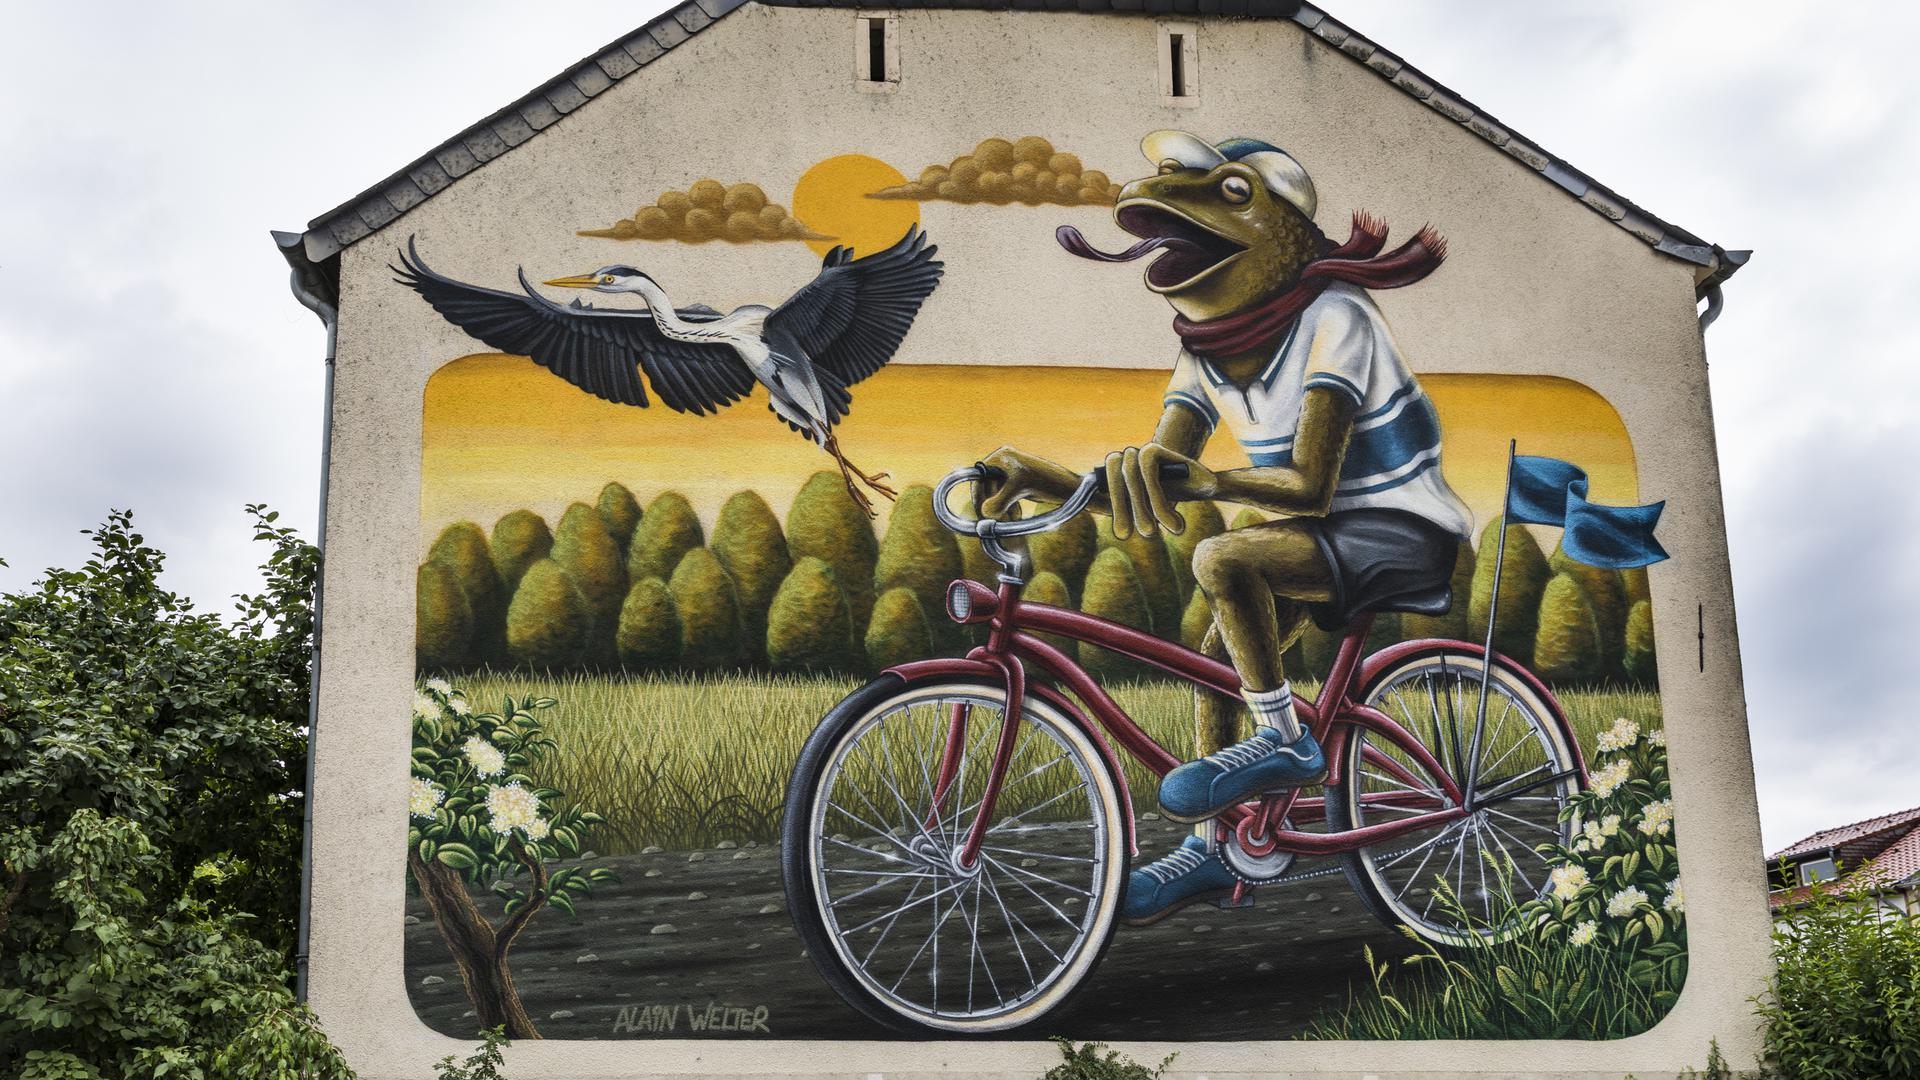 Probably the most iconic of the murals in Koler, Welter now runs workshops with businesses so staff can produce murals